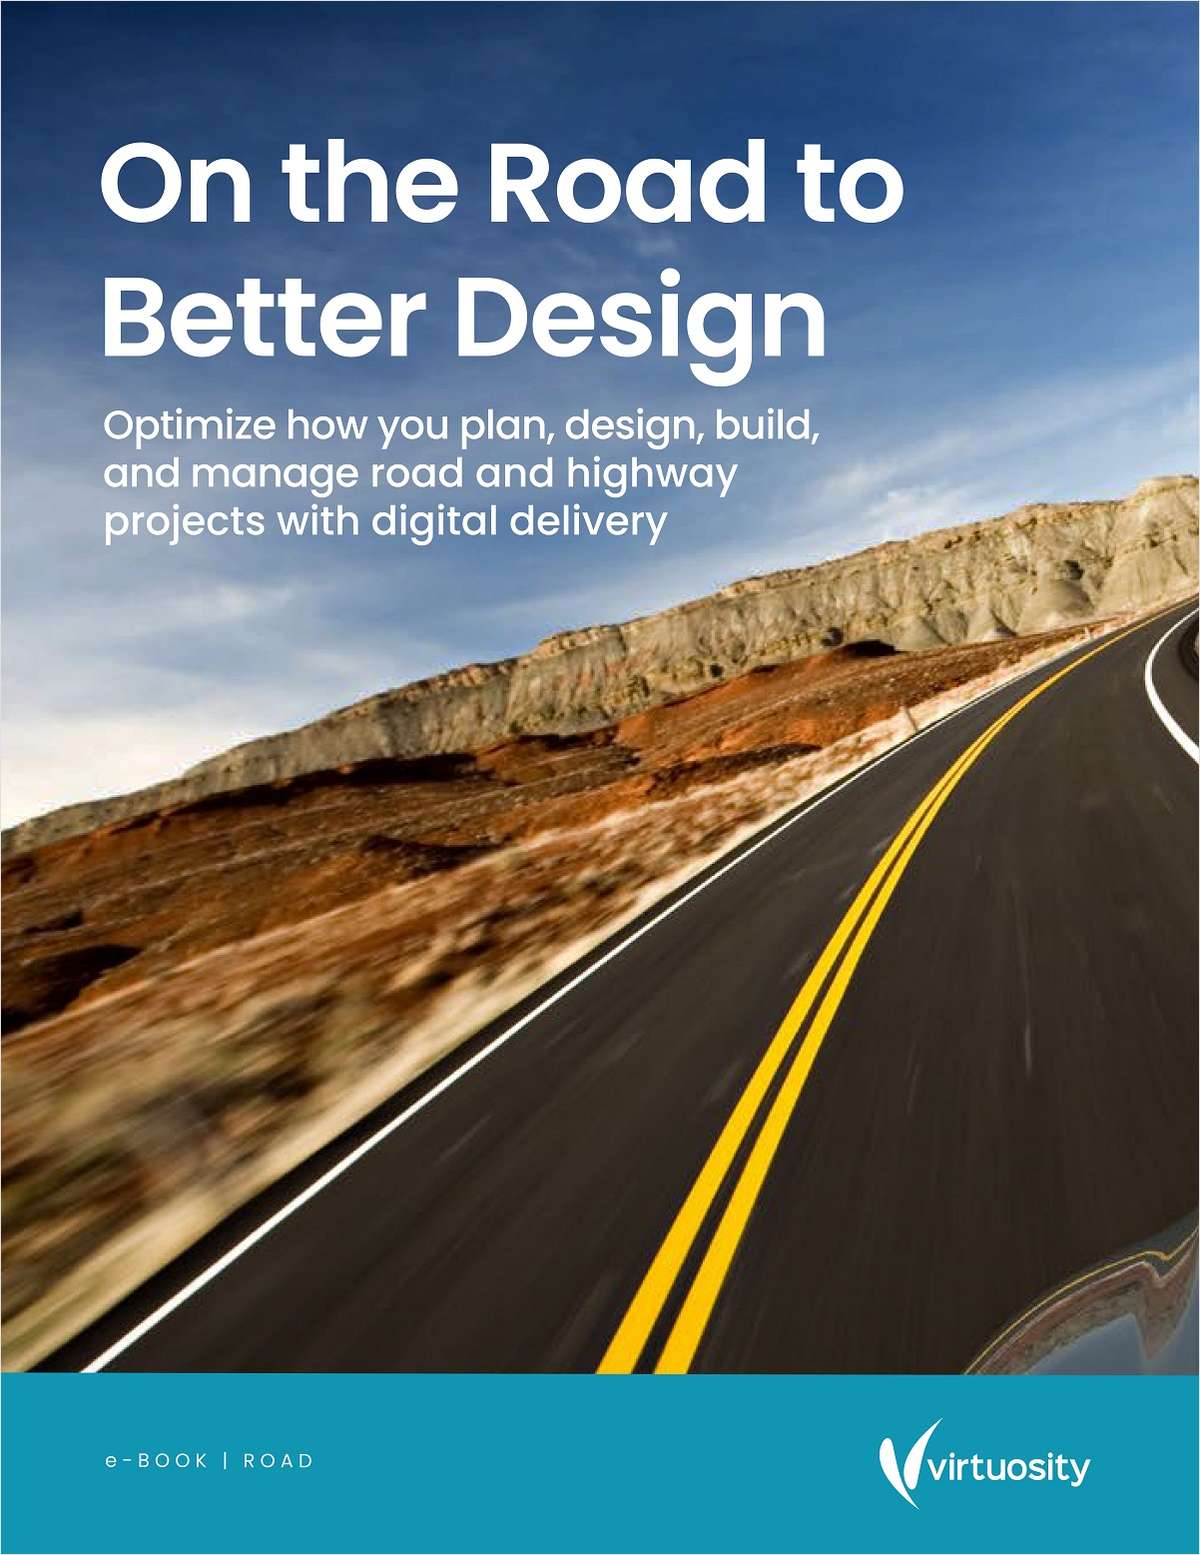 E-Book: On the Road to Better Design